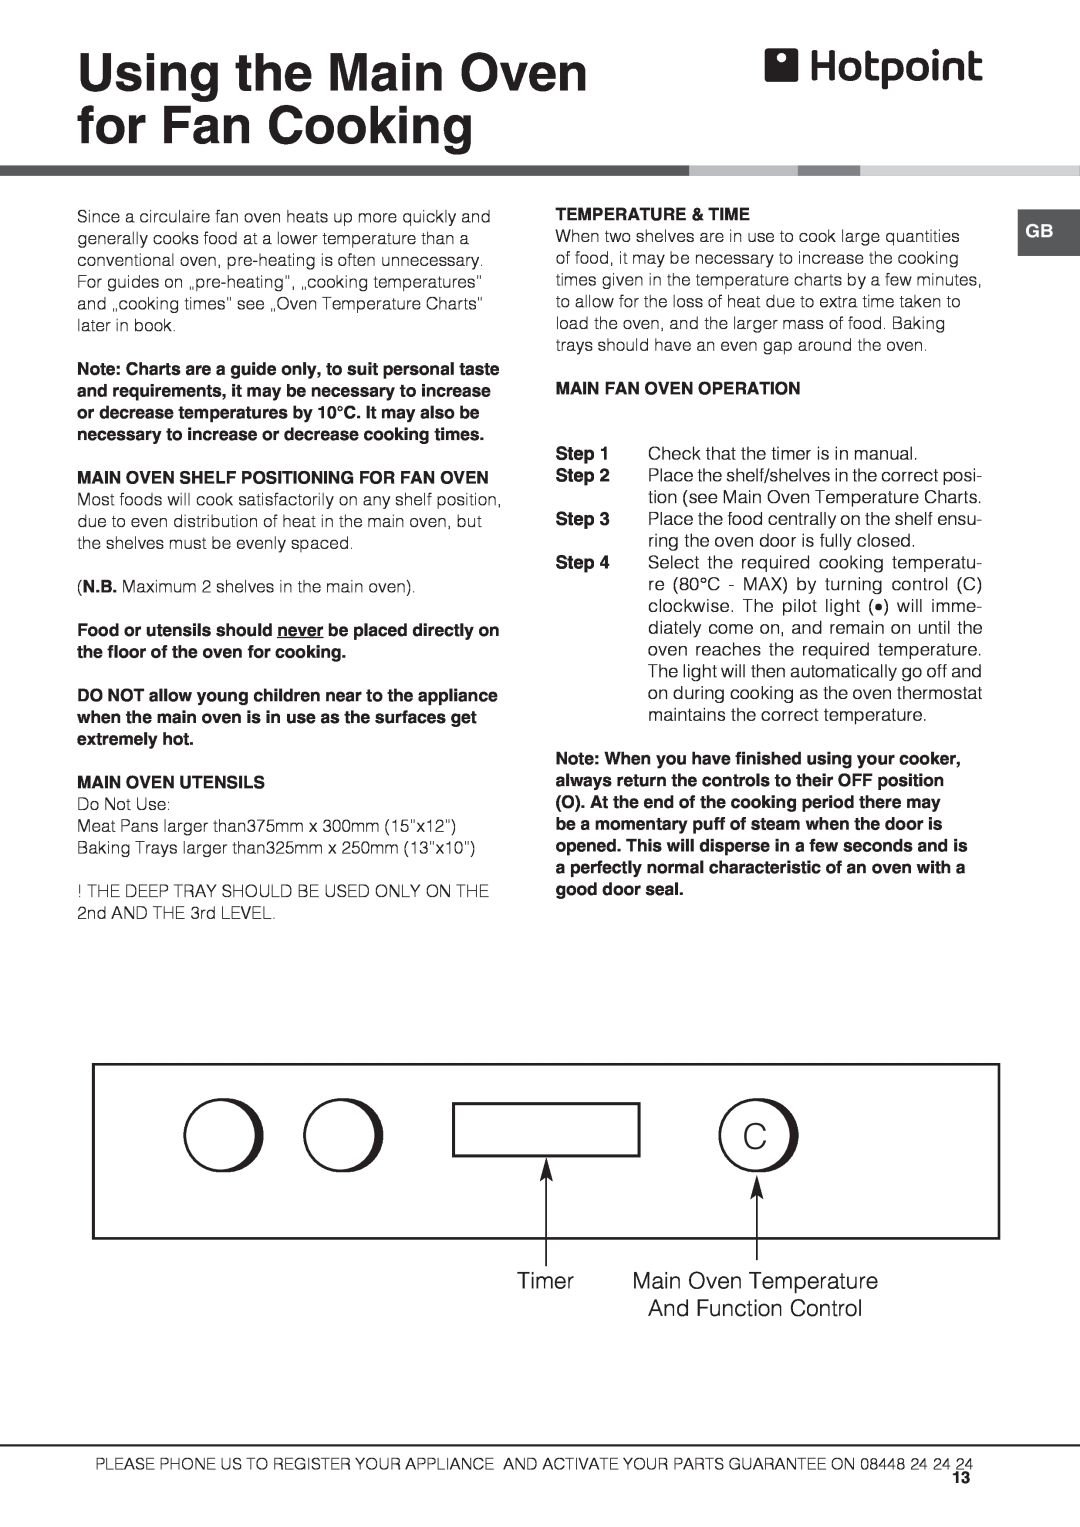 Hotpoint UBS 537 CX S manual Using the Main Oven for Fan Cooking, Timer, Main Oven Temperature, And Function Control, Step 